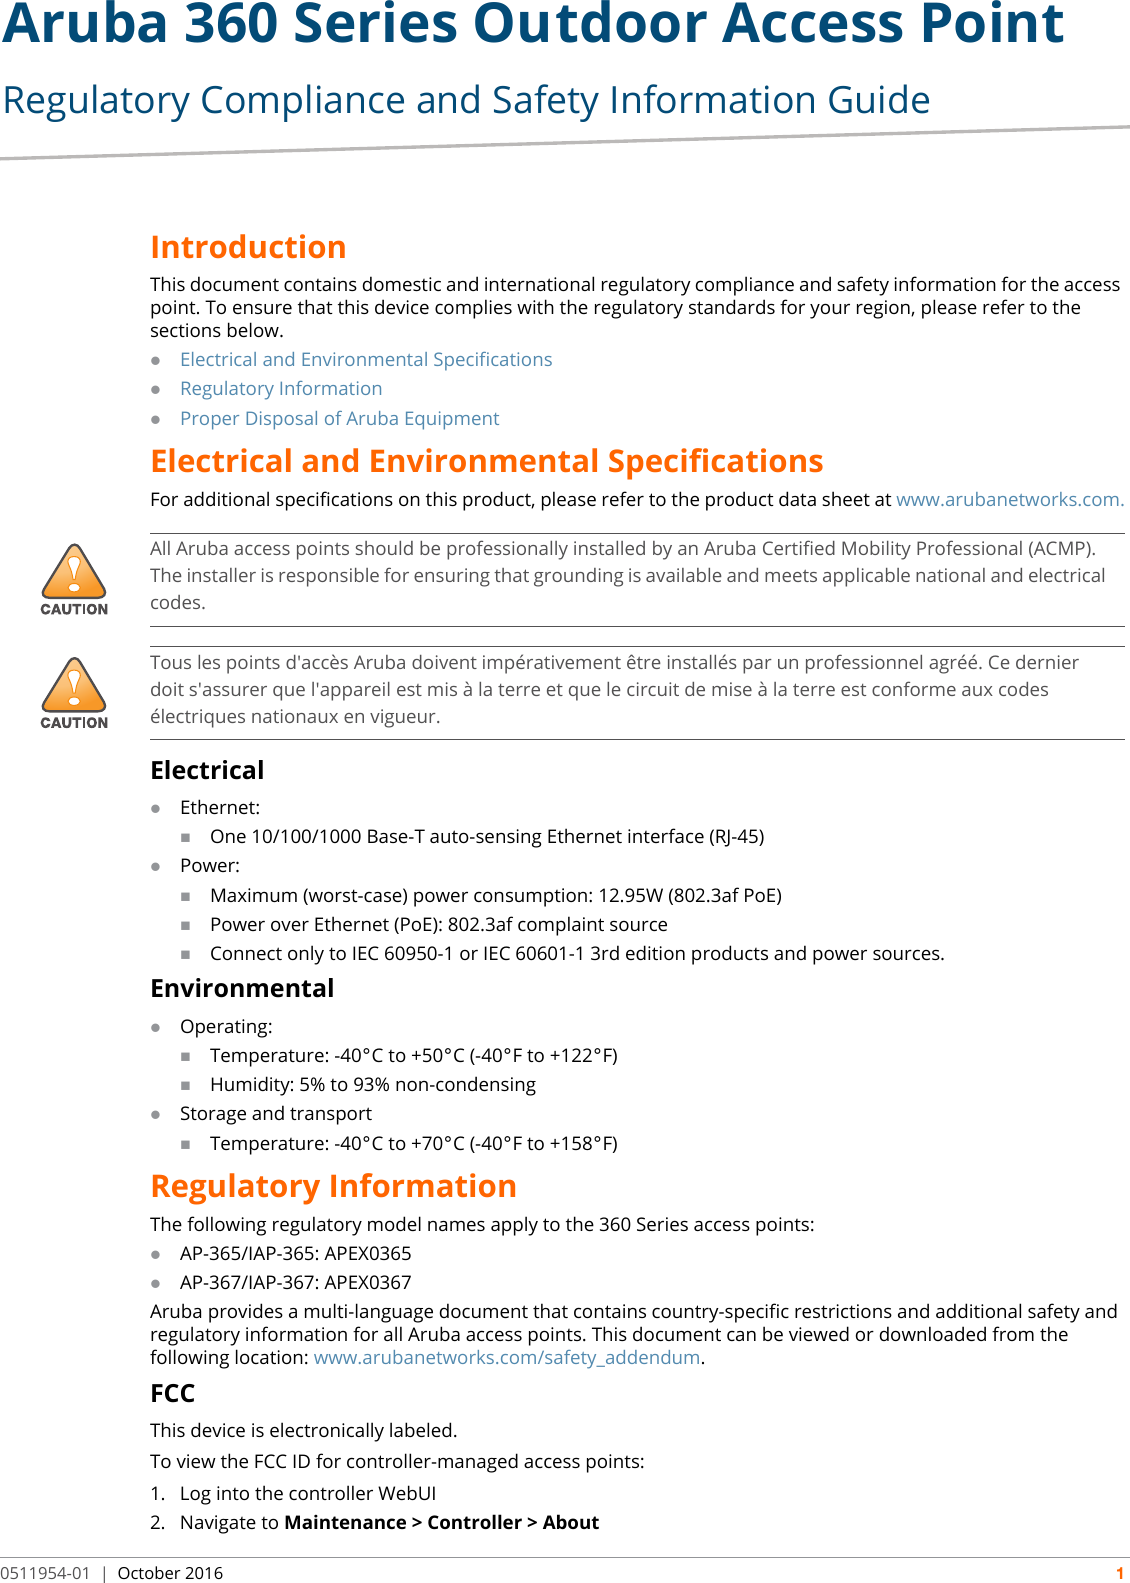 Aruba 360 Series Outdoor Access Point Regulatory Compliance and Safety Information Guide0511954-01 | October 2016 1IntroductionThis document contains domestic and international regulatory compliance and safety information for the access point. To ensure that this device complies with the regulatory standards for your region, please refer to the sections below.Electrical and Environmental SpecificationsRegulatory InformationProper Disposal of Aruba EquipmentElectrical and Environmental SpecificationsFor additional specifications on this product, please refer to the product data sheet at www.arubanetworks.com.ElectricalEthernet:One 10/100/1000 Base-T auto-sensing Ethernet interface (RJ-45)Power:Maximum (worst-case) power consumption: 12.95W (802.3af PoE)Power over Ethernet (PoE): 802.3af complaint sourceConnect only to IEC 60950-1 or IEC 60601-1 3rd edition products and power sources.EnvironmentalOperating:Temperature: -40°C to +50°C (-40°F to +122°F)Humidity: 5% to 93% non-condensingStorage and transportTemperature: -40°C to +70°C (-40°F to +158°F)Regulatory InformationThe following regulatory model names apply to the 360 Series access points:AP-365/IAP-365: APEX0365AP-367/IAP-367: APEX0367Aruba provides a multi-language document that contains country-specific restrictions and additional safety andregulatory information for all Aruba access points. This document can be viewed or downloaded from thefollowing location: www.arubanetworks.com/safety_addendum.FCCThis device is electronically labeled.To view the FCC ID for controller-managed access points:1. Log into the controller WebUI2. Navigate to Maintenance &gt; Controller &gt; About!All Aruba access points should be professionally installed by an Aruba Certified Mobility Professional (ACMP). The installer is responsible for ensuring that grounding is available and meets applicable national and electrical codes.!Tous les points d&apos;accès Aruba doivent impérativement être installés par un professionnel agréé. Ce dernier doit s&apos;assurer que l&apos;appareil est mis à la terre et que le circuit de mise à la terre est conforme aux codes électriques nationaux en vigueur.